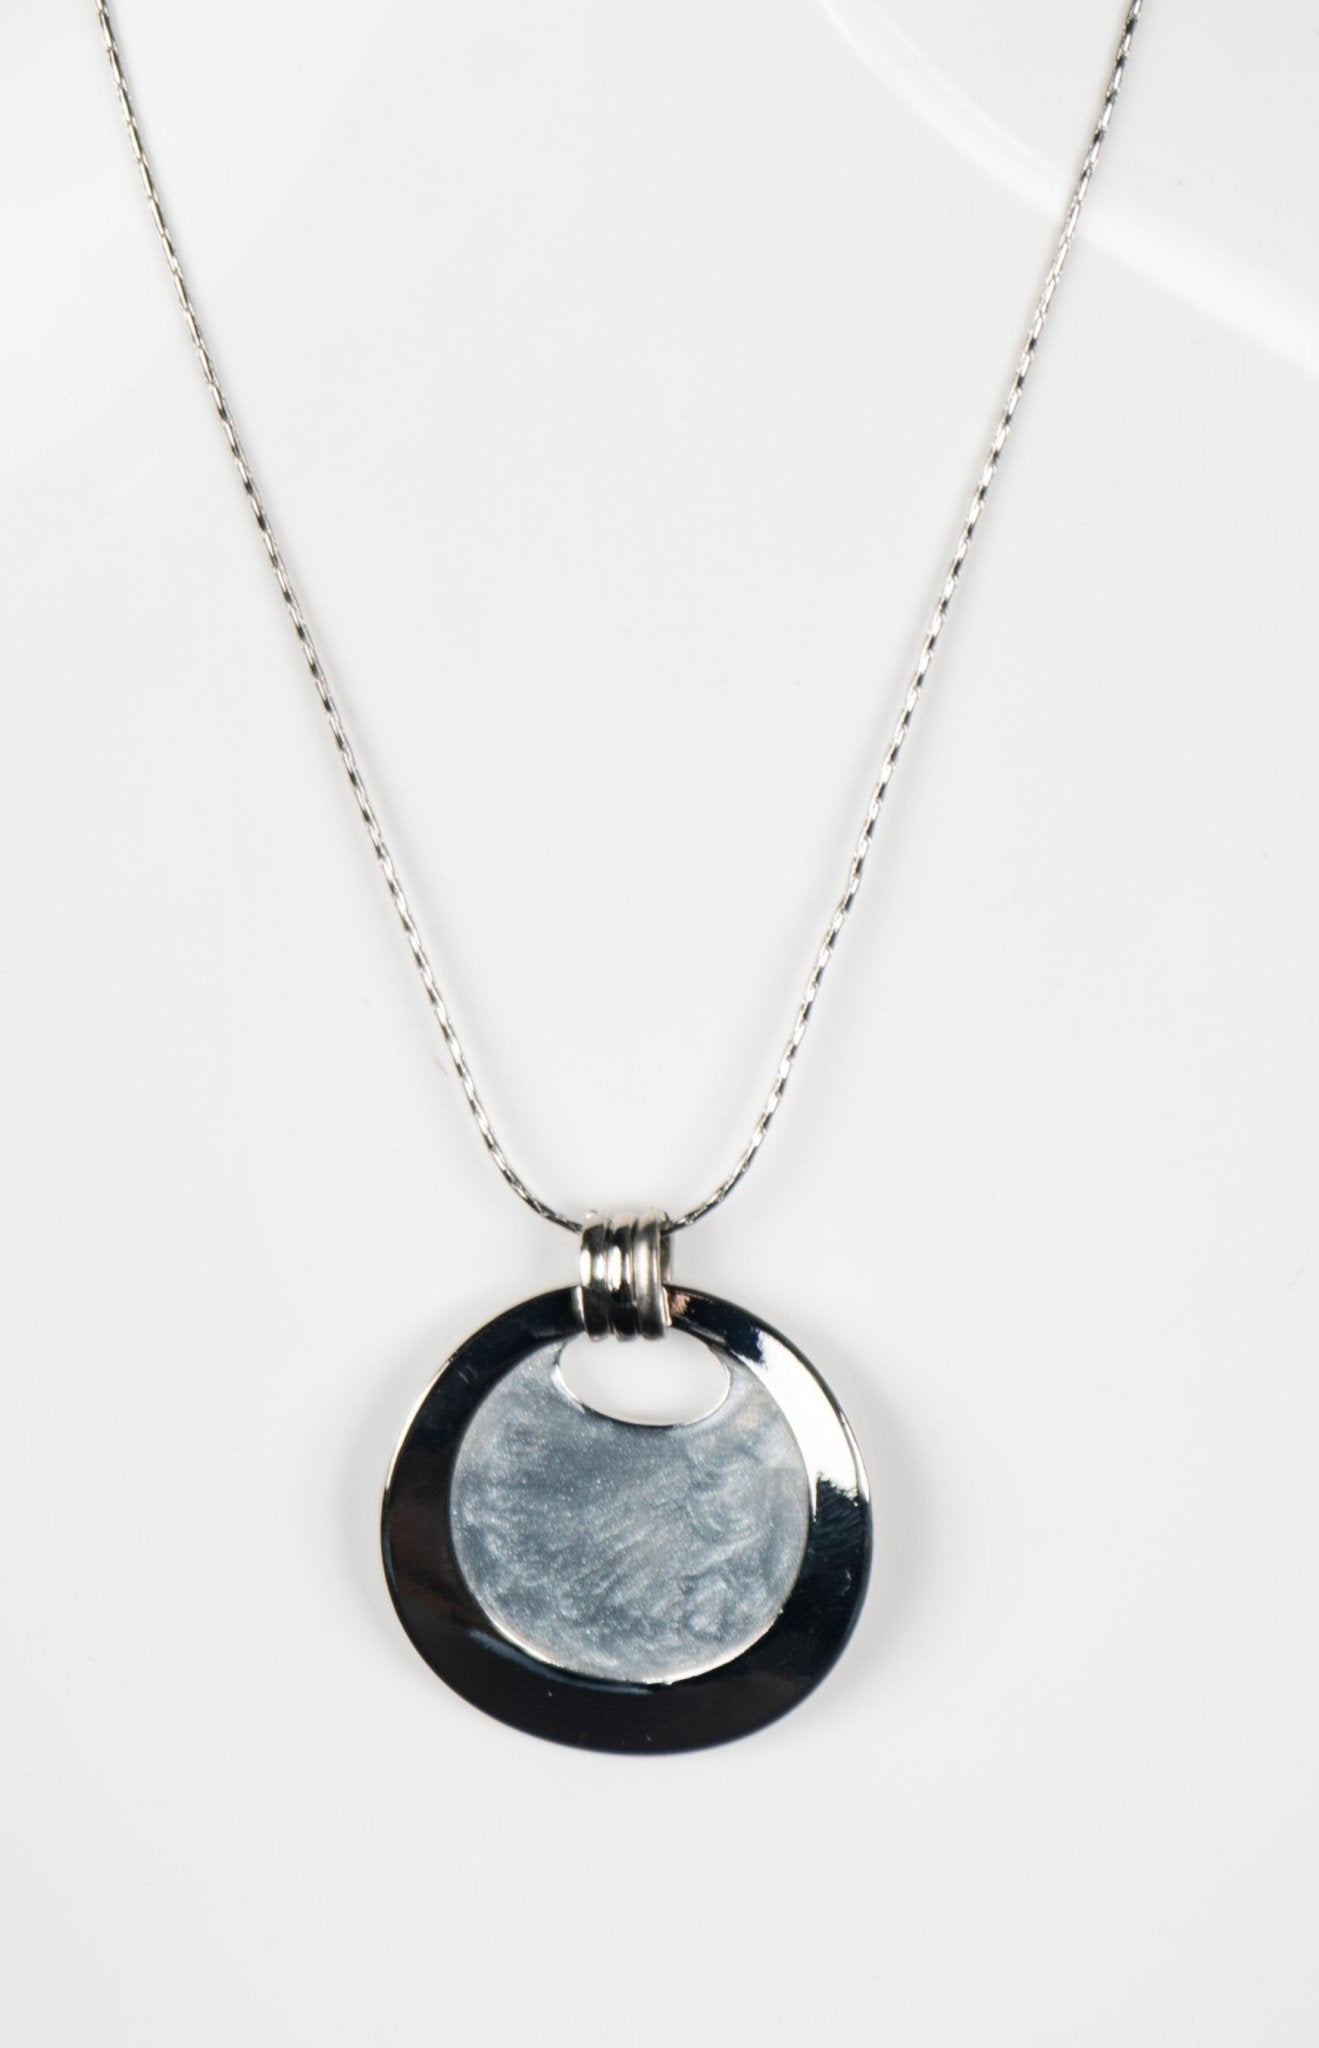 Induglence Necklace - A & M News and Gifts